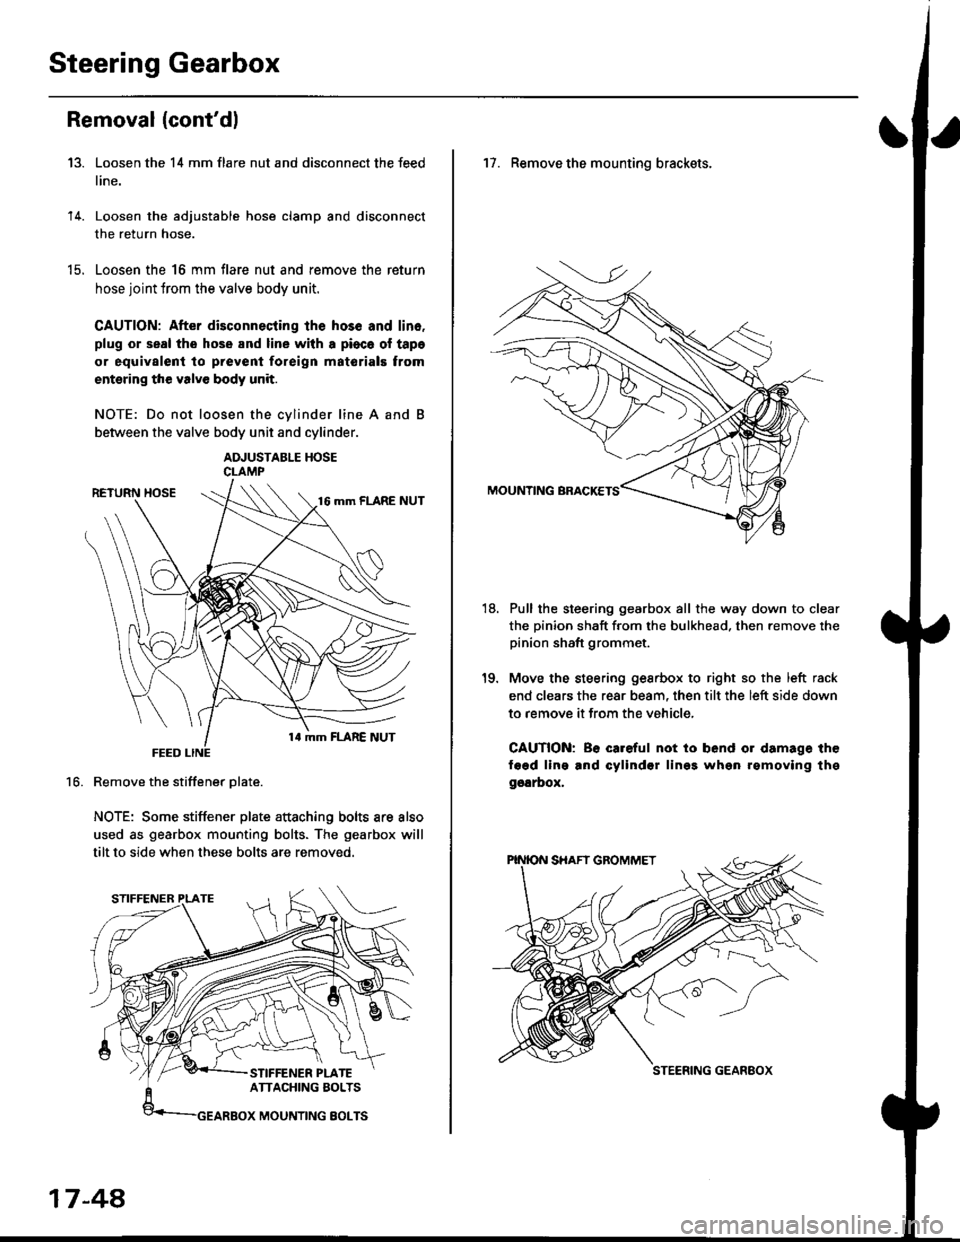 HONDA CIVIC 1998 6.G Owners Guide Steering Gearbox
Removal {contdl
Loosen the 14 mm flare nut and disconnect the feed
line.
Loosen the adjustable hose clamp and disconnect
the return hose.
Loosen the 16 mm flare nut and remove the re